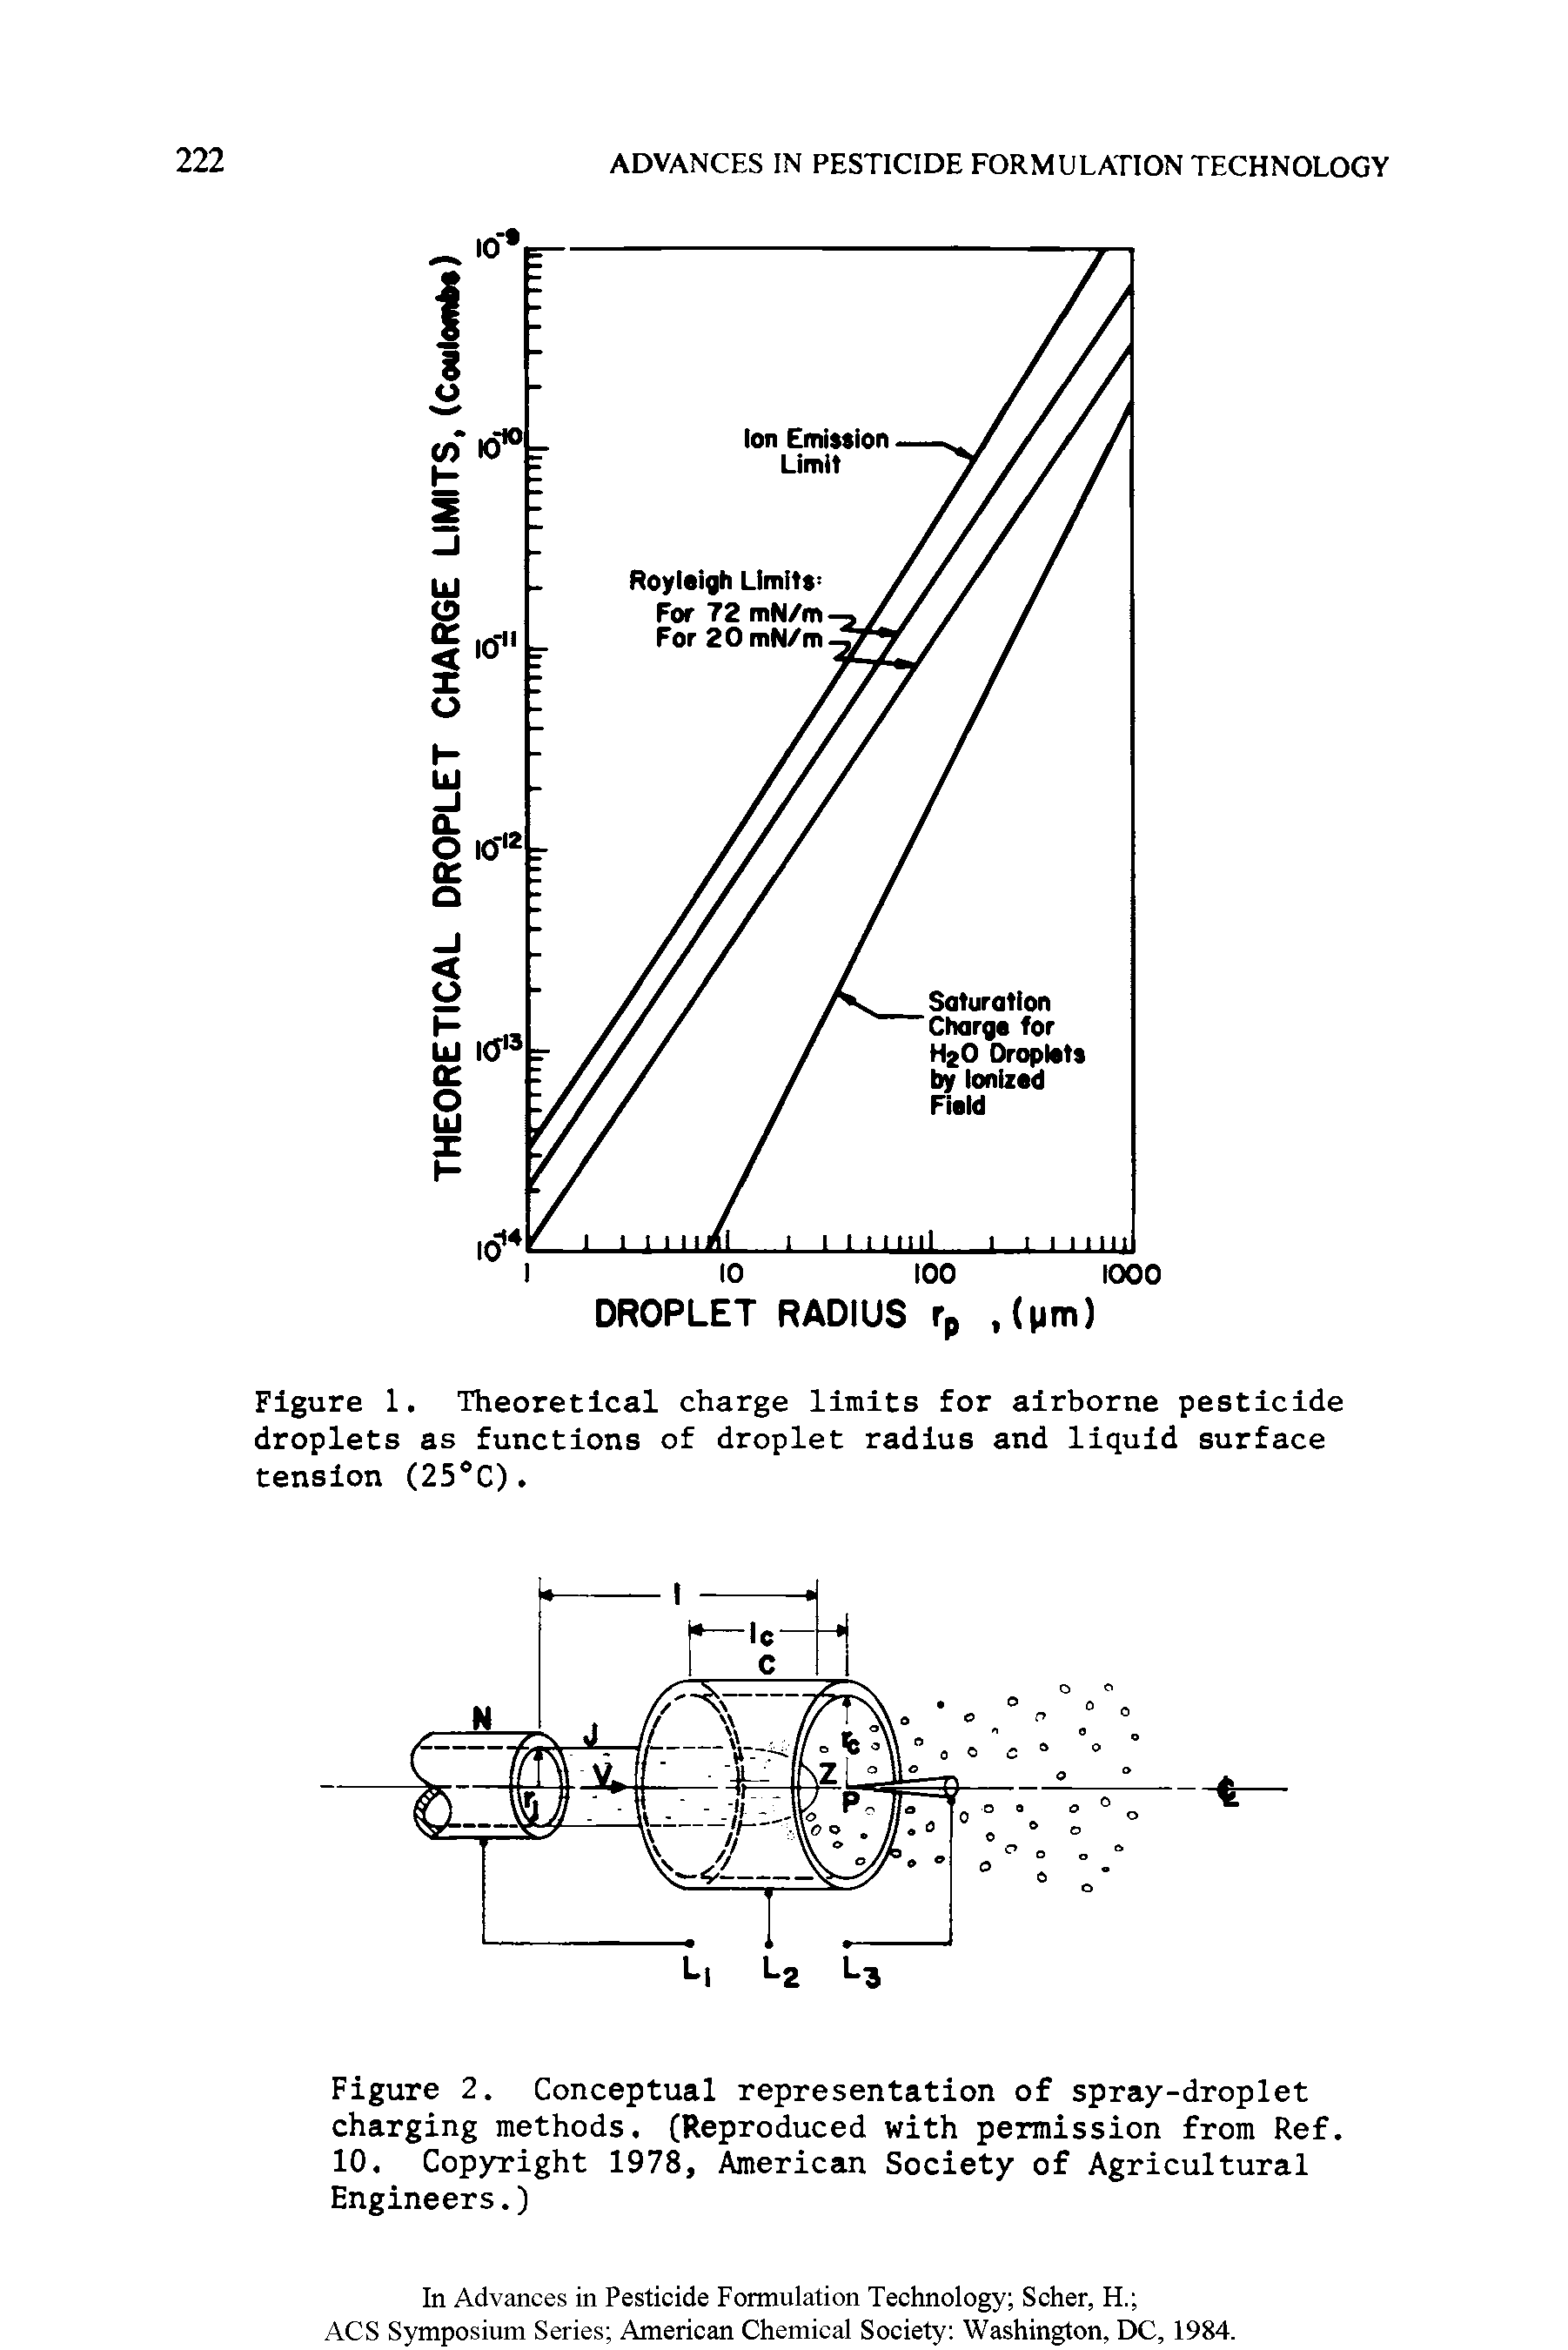 Figure 2. Conceptual representation of spray-droplet charging methods. (Reproduced with permission from Ref. 10. Copyright 1978, American Society of Agricultural Engineers.)...